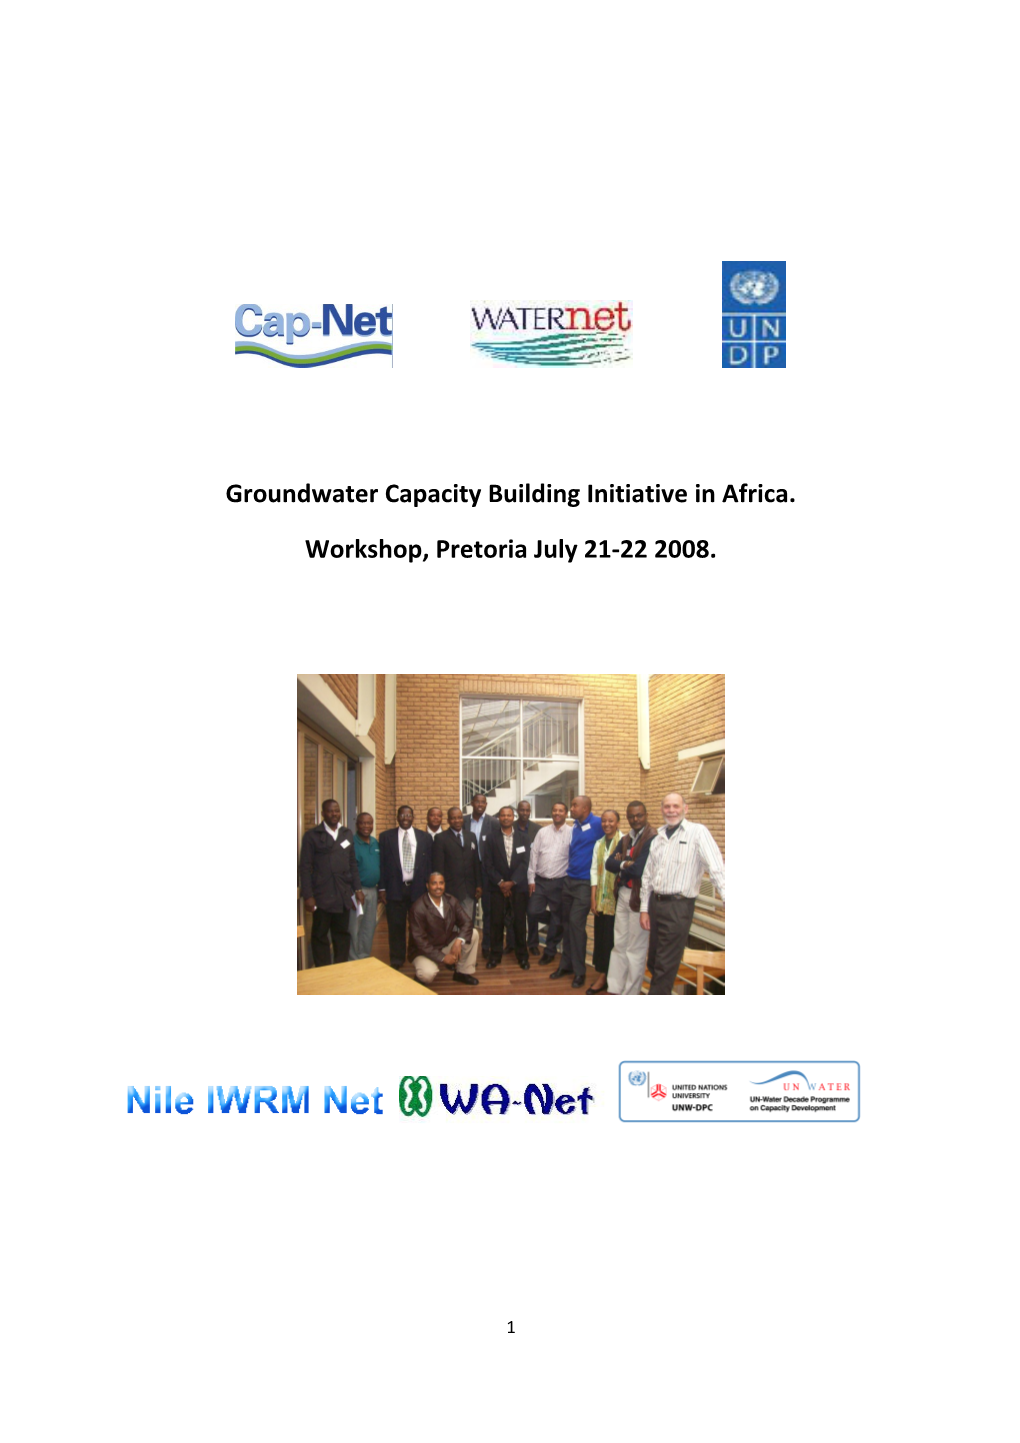 Workshop Notes from the Groundwater Capacity Building Initiative (GWCB) in Africa